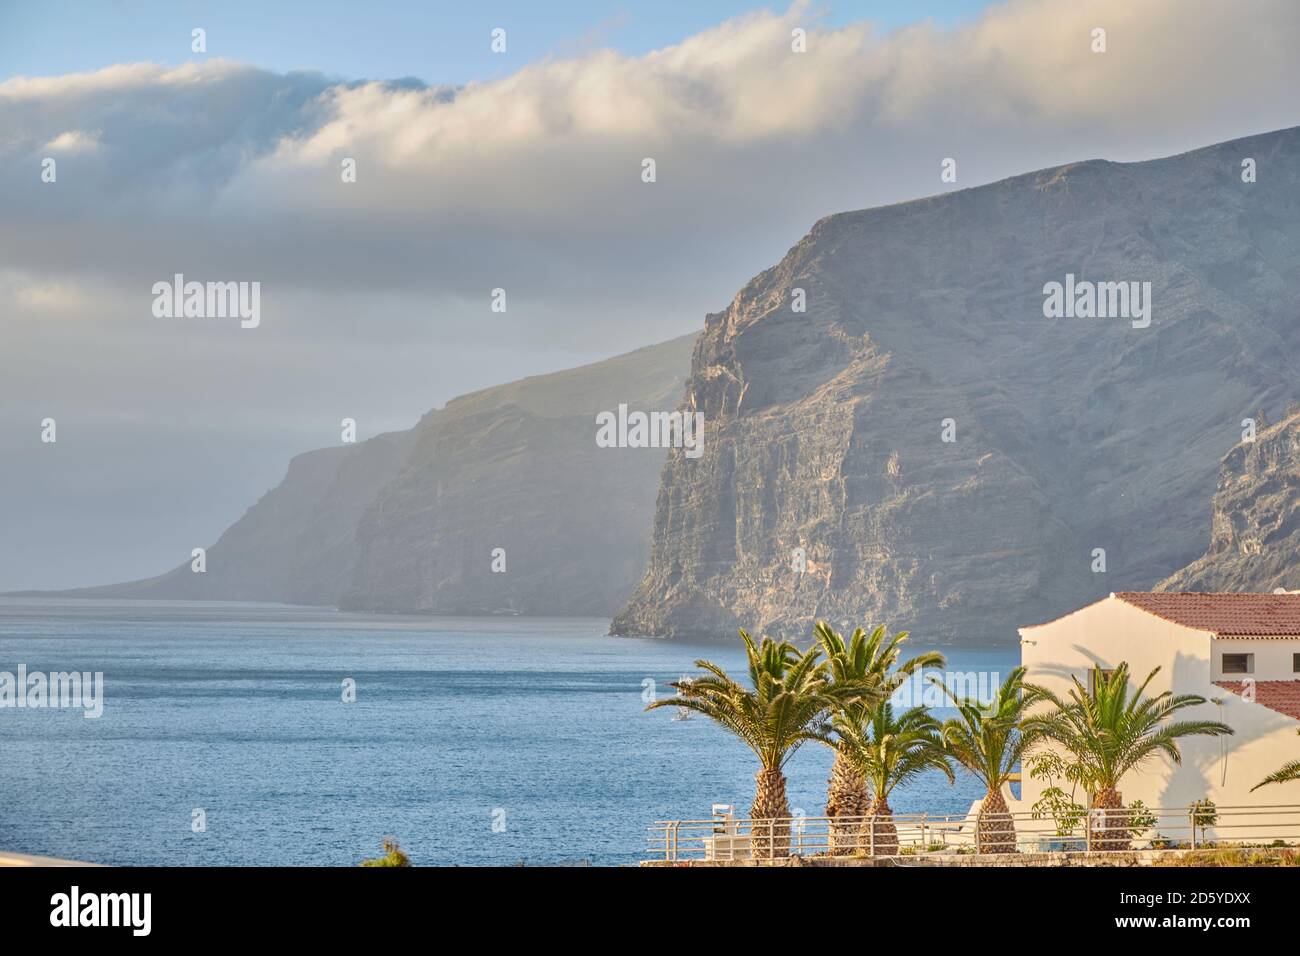 Panoramic coastline in Tenerife, Spain. Huge cliffs at the coastline of Tenerife with palm trees in the foreground. Stock Photo